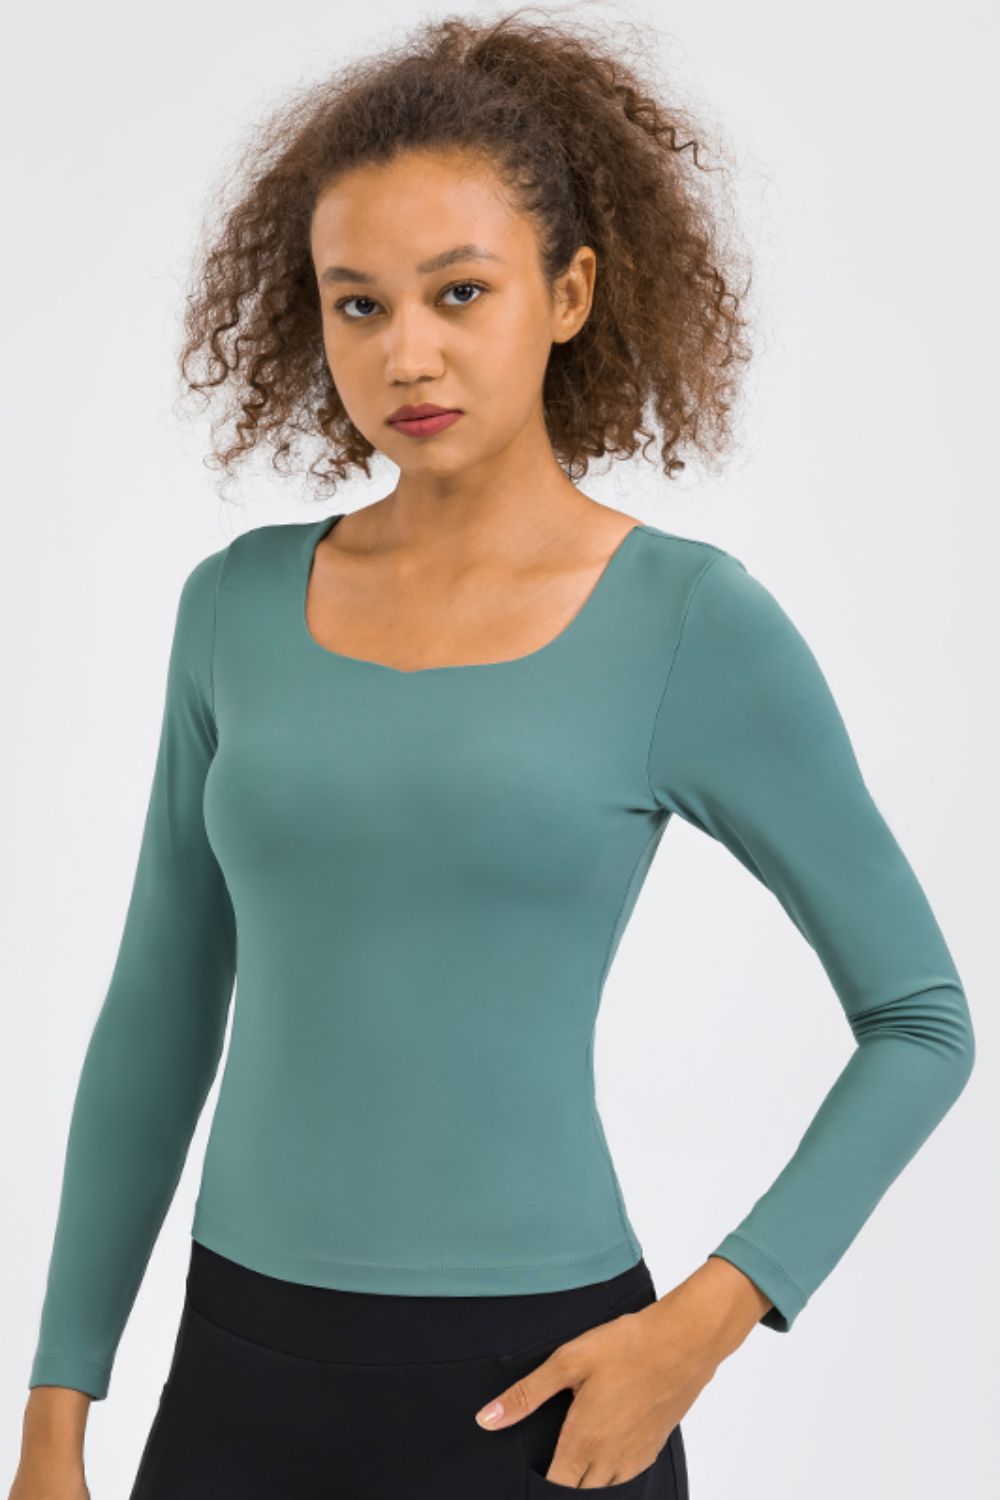 Women’s Feel Like Skin Highly Stretchy Long Sleeve Sports Top